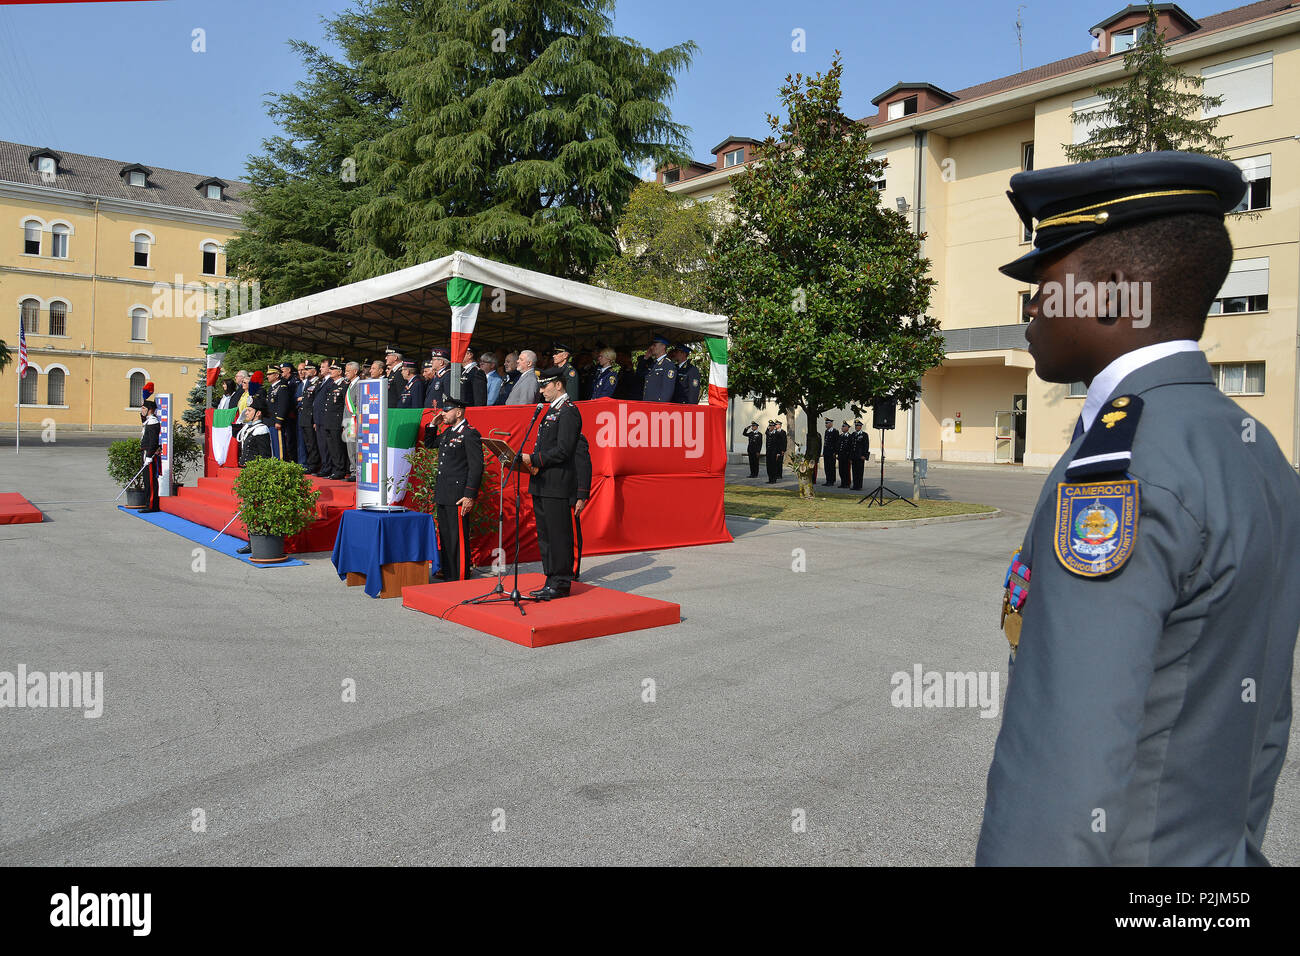 US, European and African authorities stand together during the European Union Police Services Training (EUPST) 2015 – 2018 closing ceremony at General A. Chinotto barracks, Vicenza, Italy, Sept. 30, 2016. The Italian Carabinieri organized the EUPST 2015 – 2018 Italian session from Sept. 19-30. The training audience consisted of approximately 200 police officers and gendarmes from the European Union, United States and across Africa. (U.S. Army Photo by Visual Information Specialist Paolo Bovo/released) Stock Photo